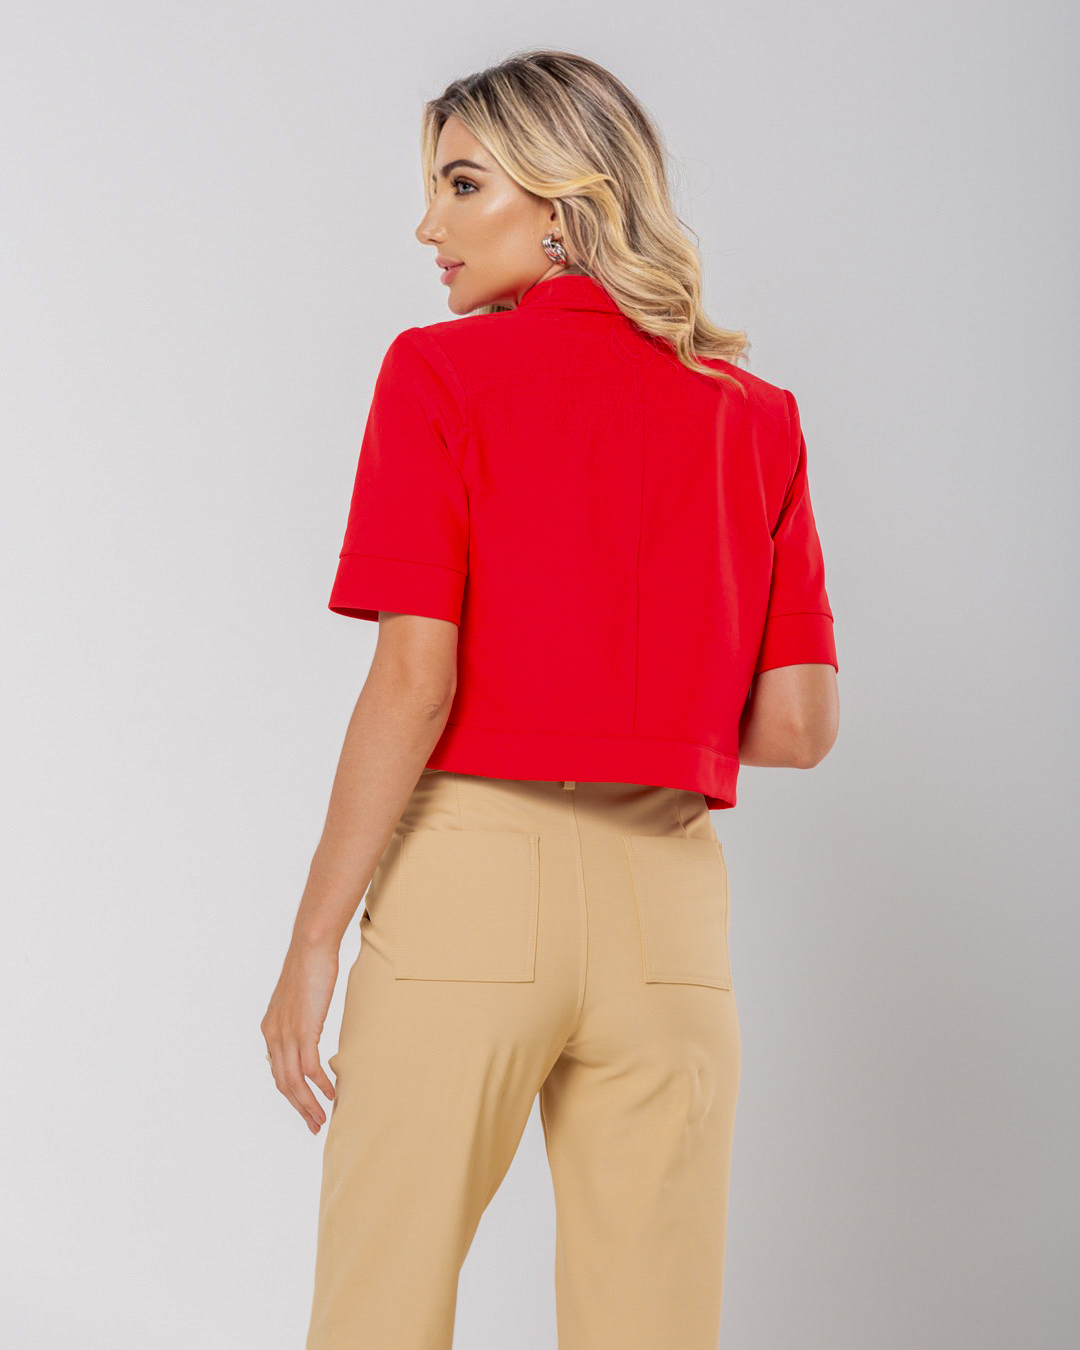 Miss Misses - Miss Misses Shirt With Grosgrain Button Pockets Red - 54107024